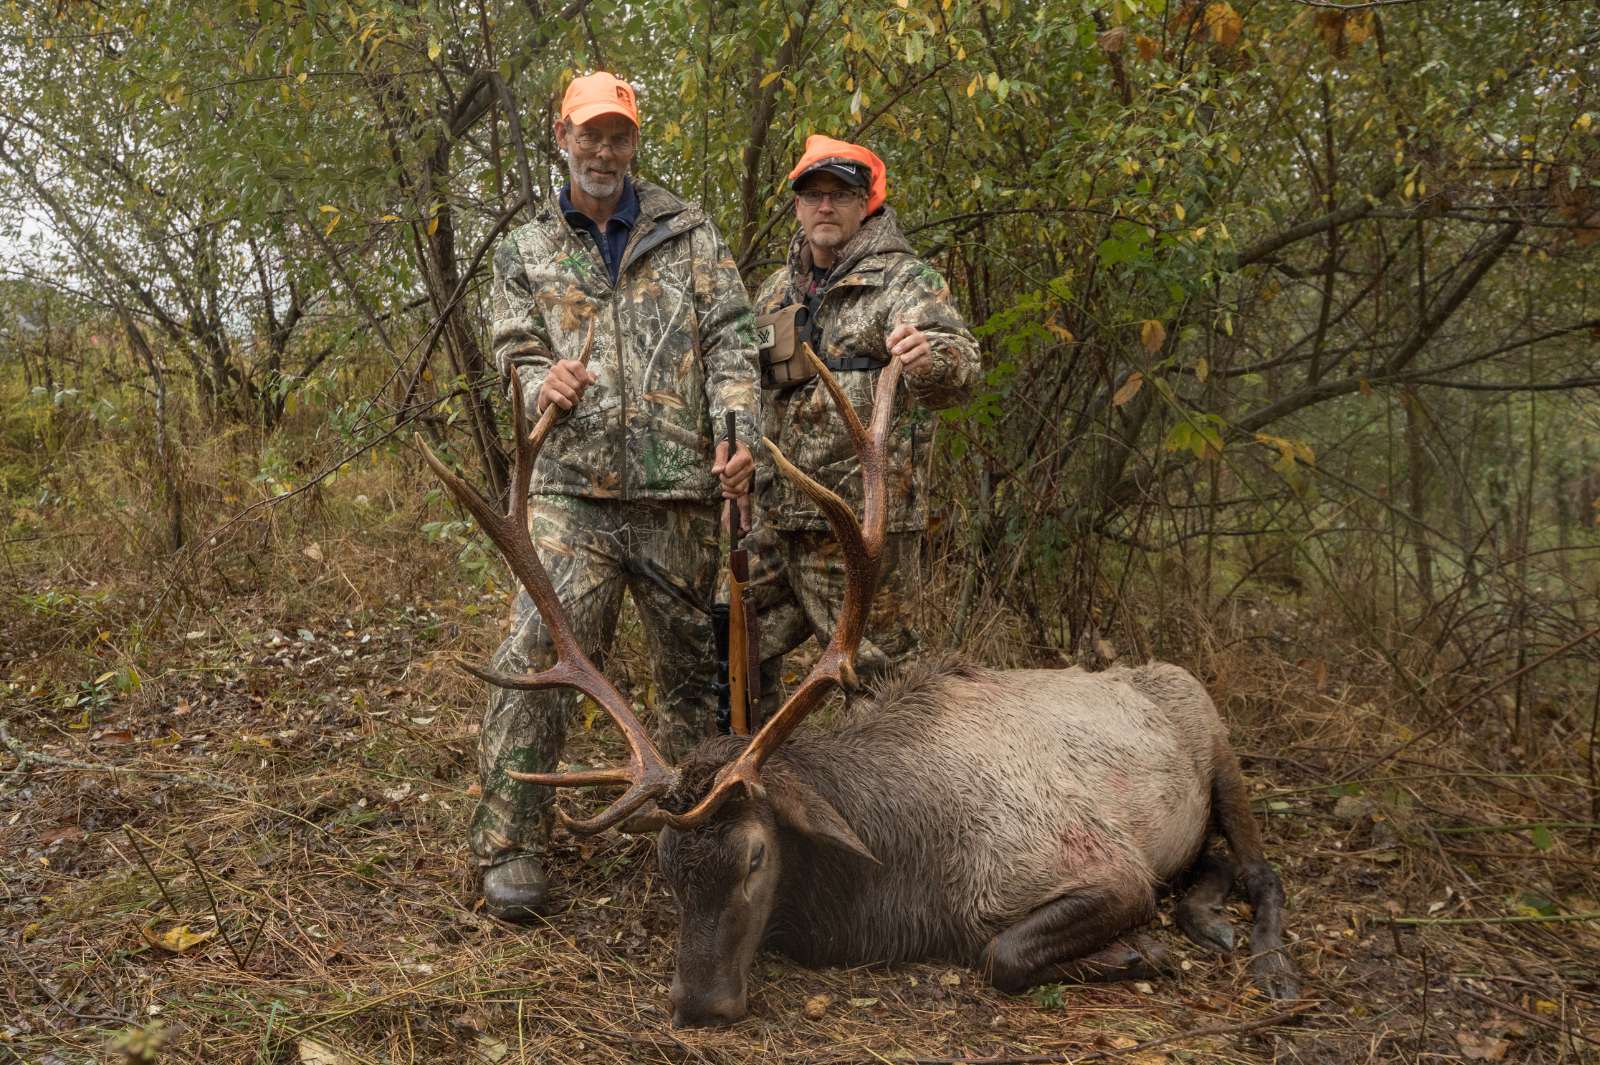 A photo taken in the nighttime of two hunters in camoflague and blaze orange posing with a large bull elk lying on the ground.